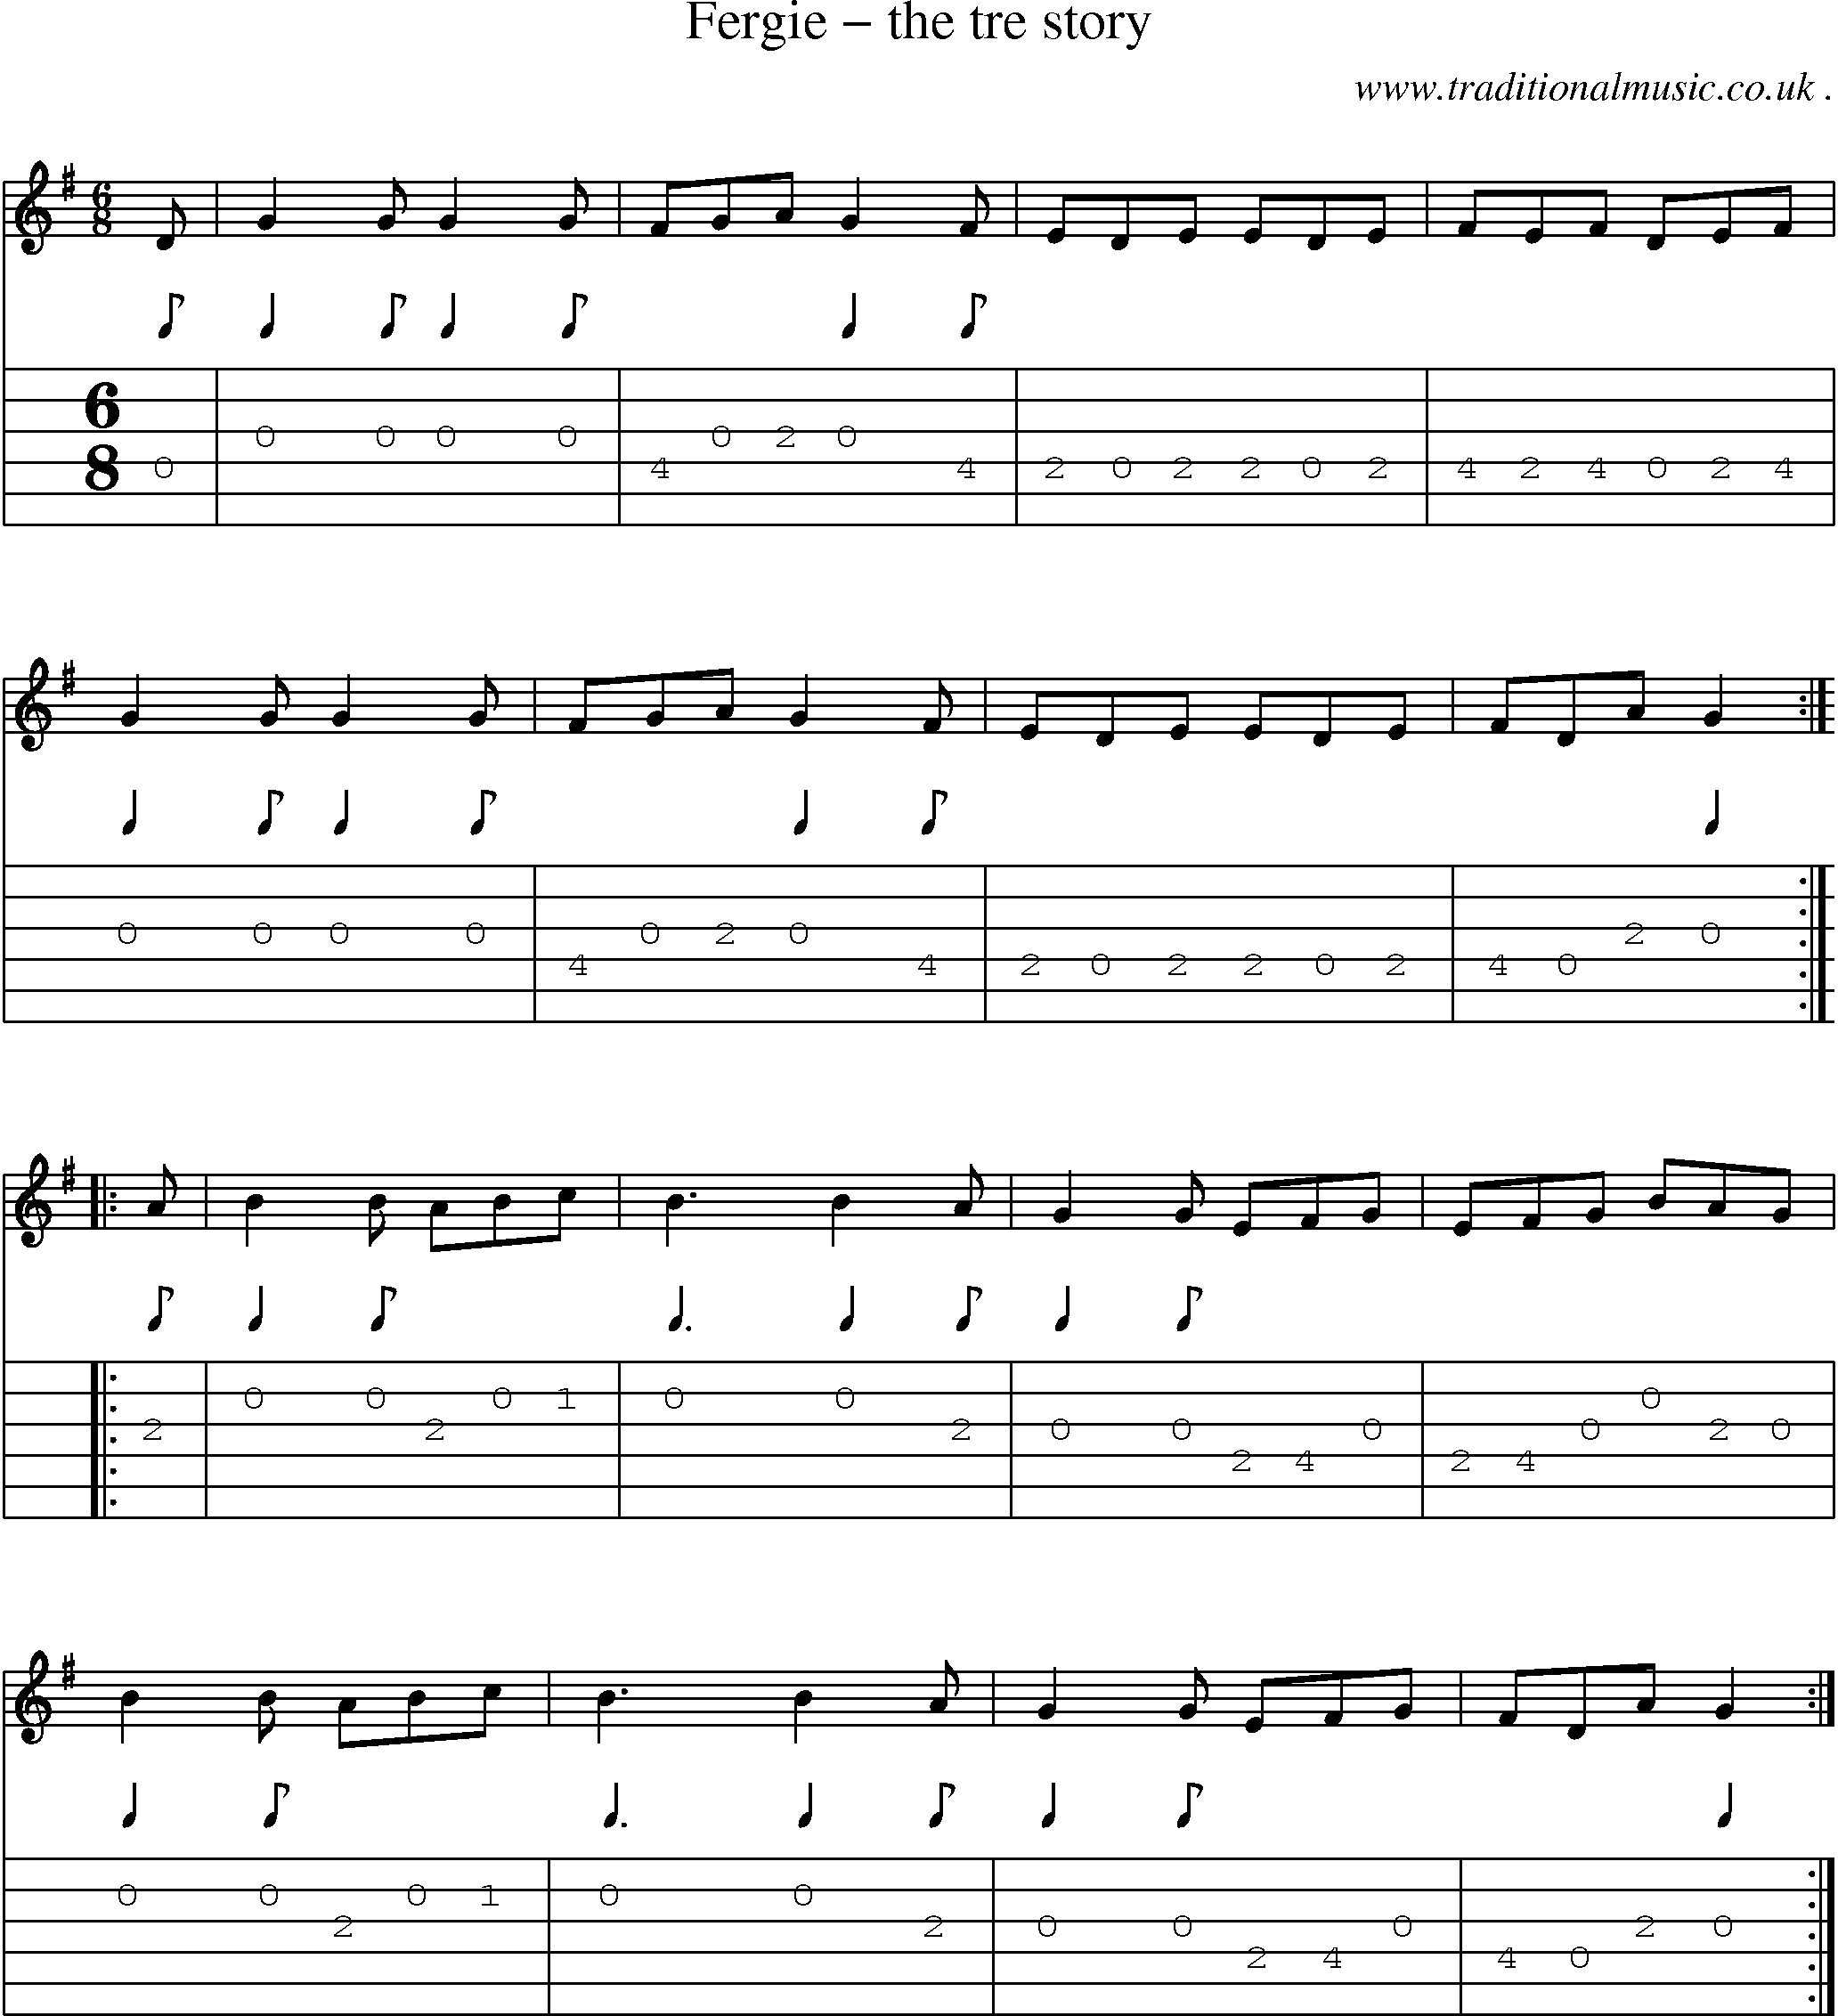 Sheet-Music and Guitar Tabs for Fergie The Tre Story